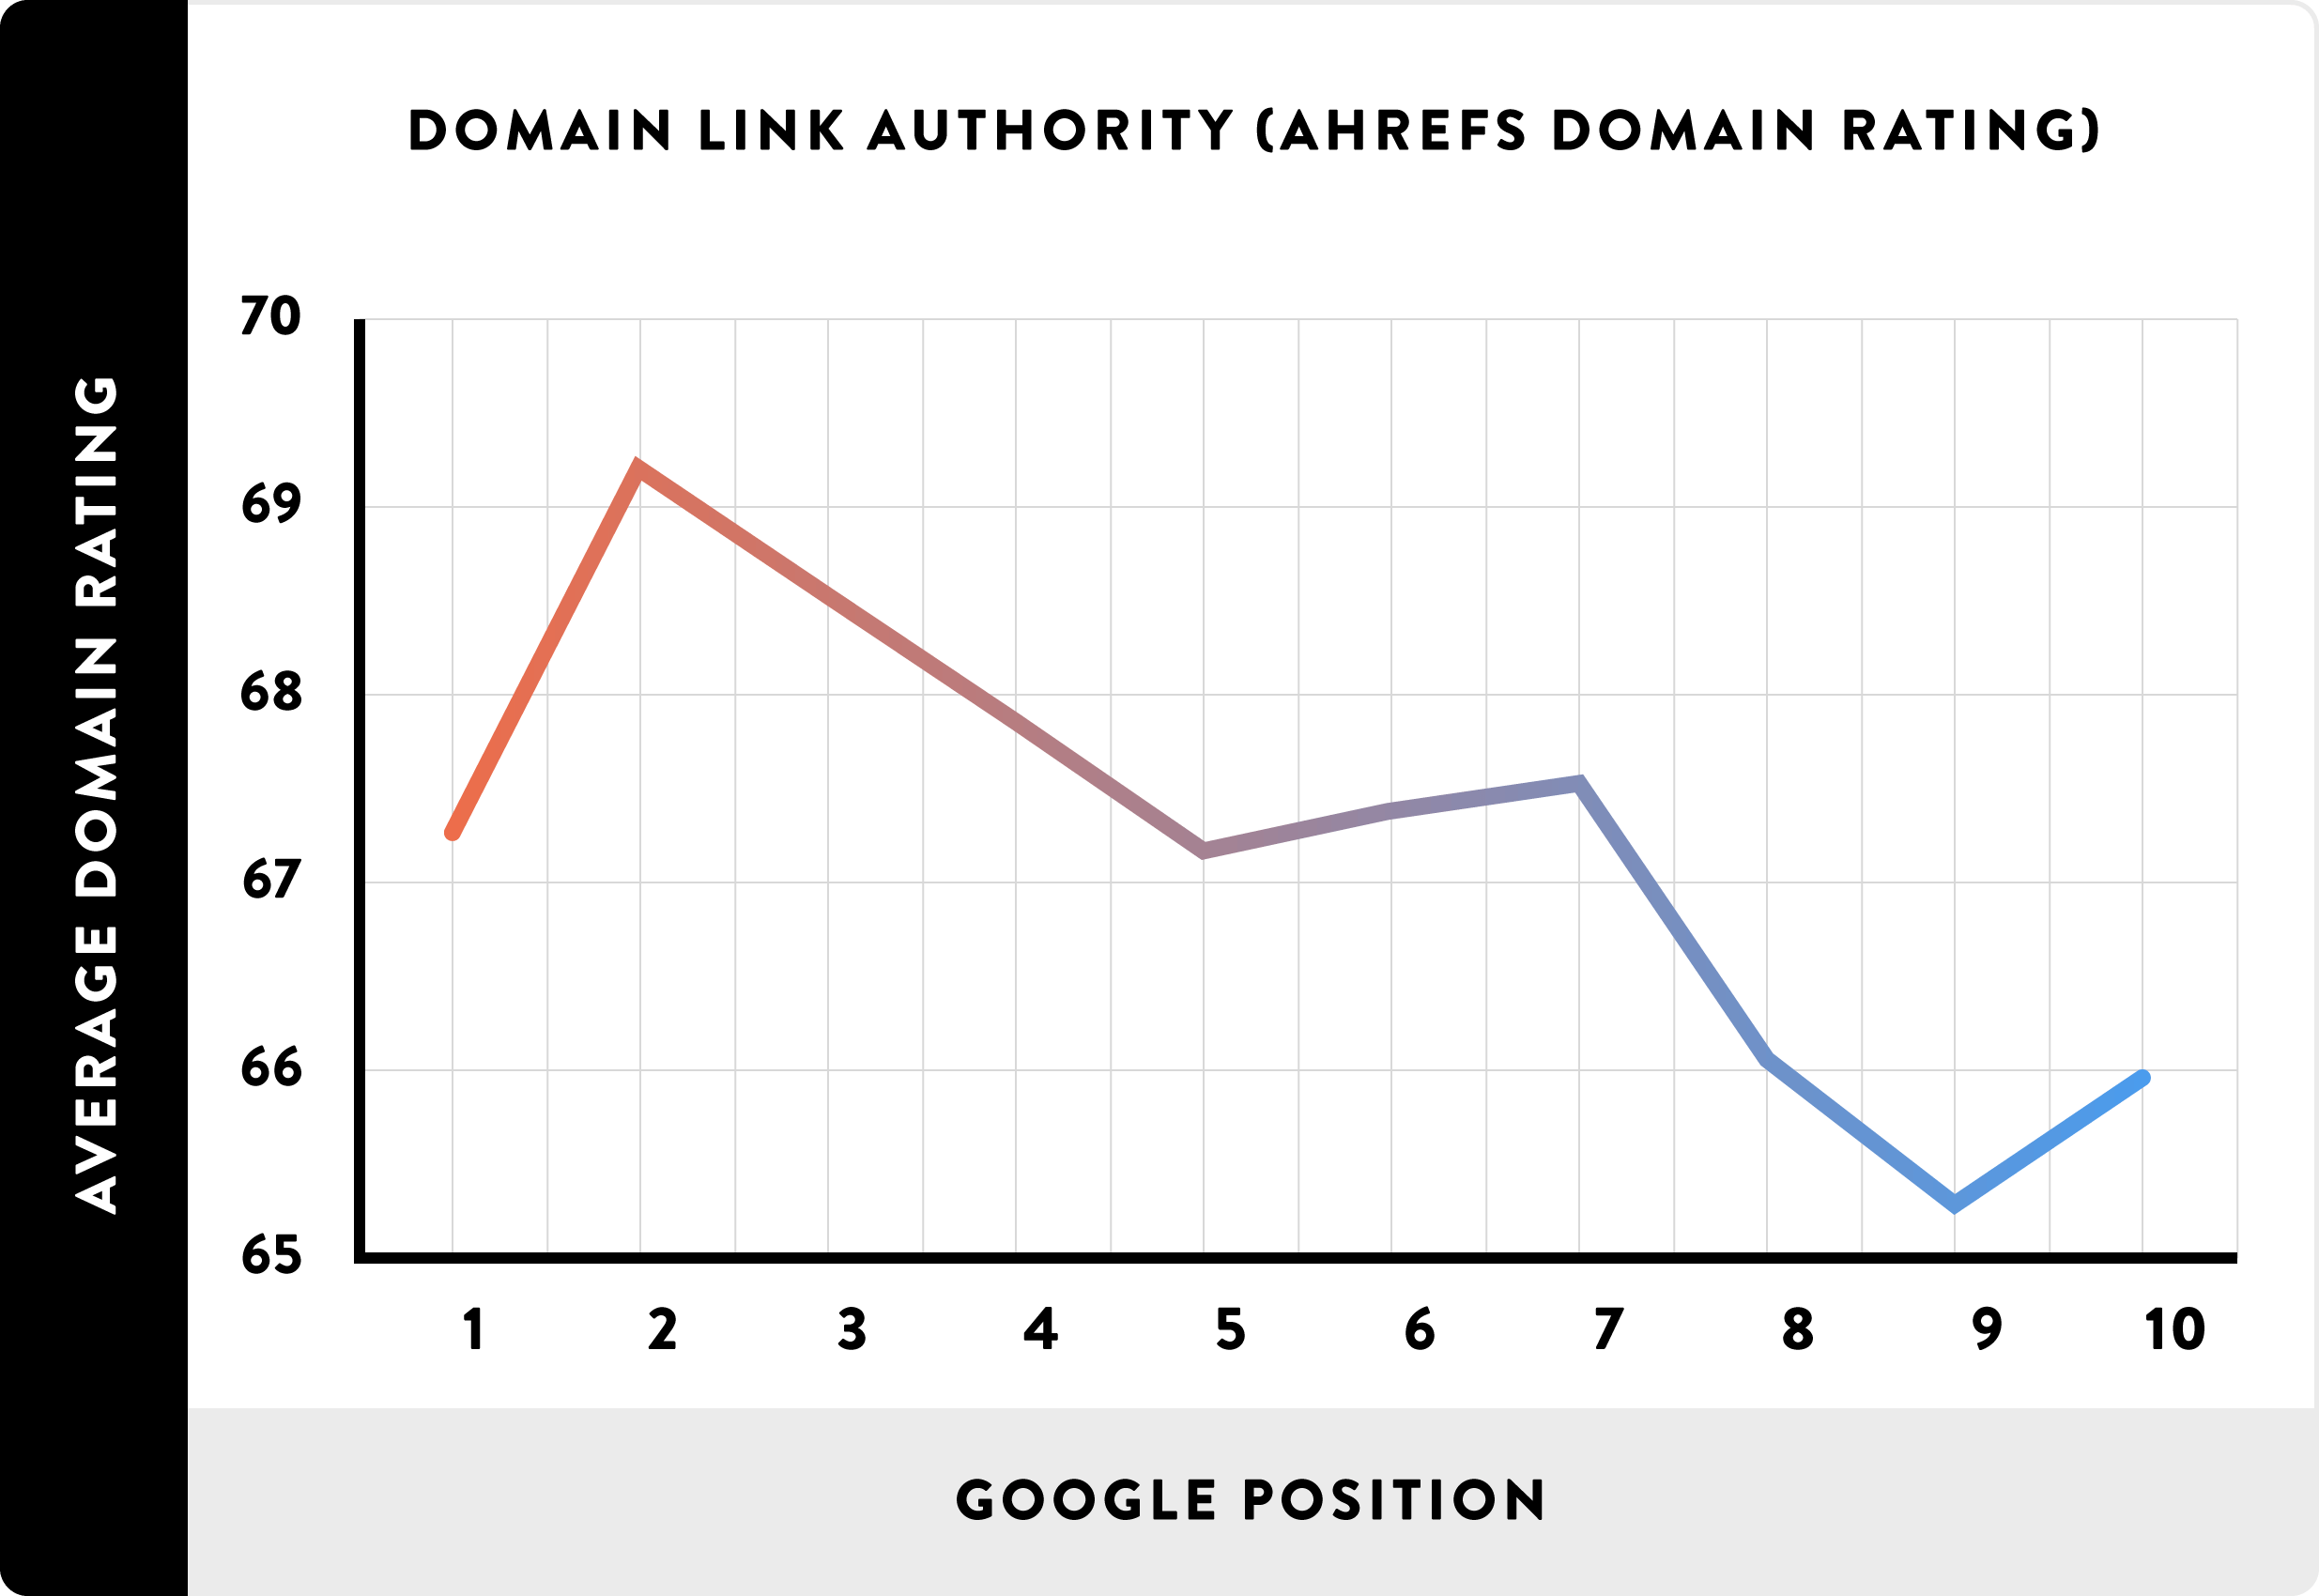 Higher Domain Authority, better overall rankings